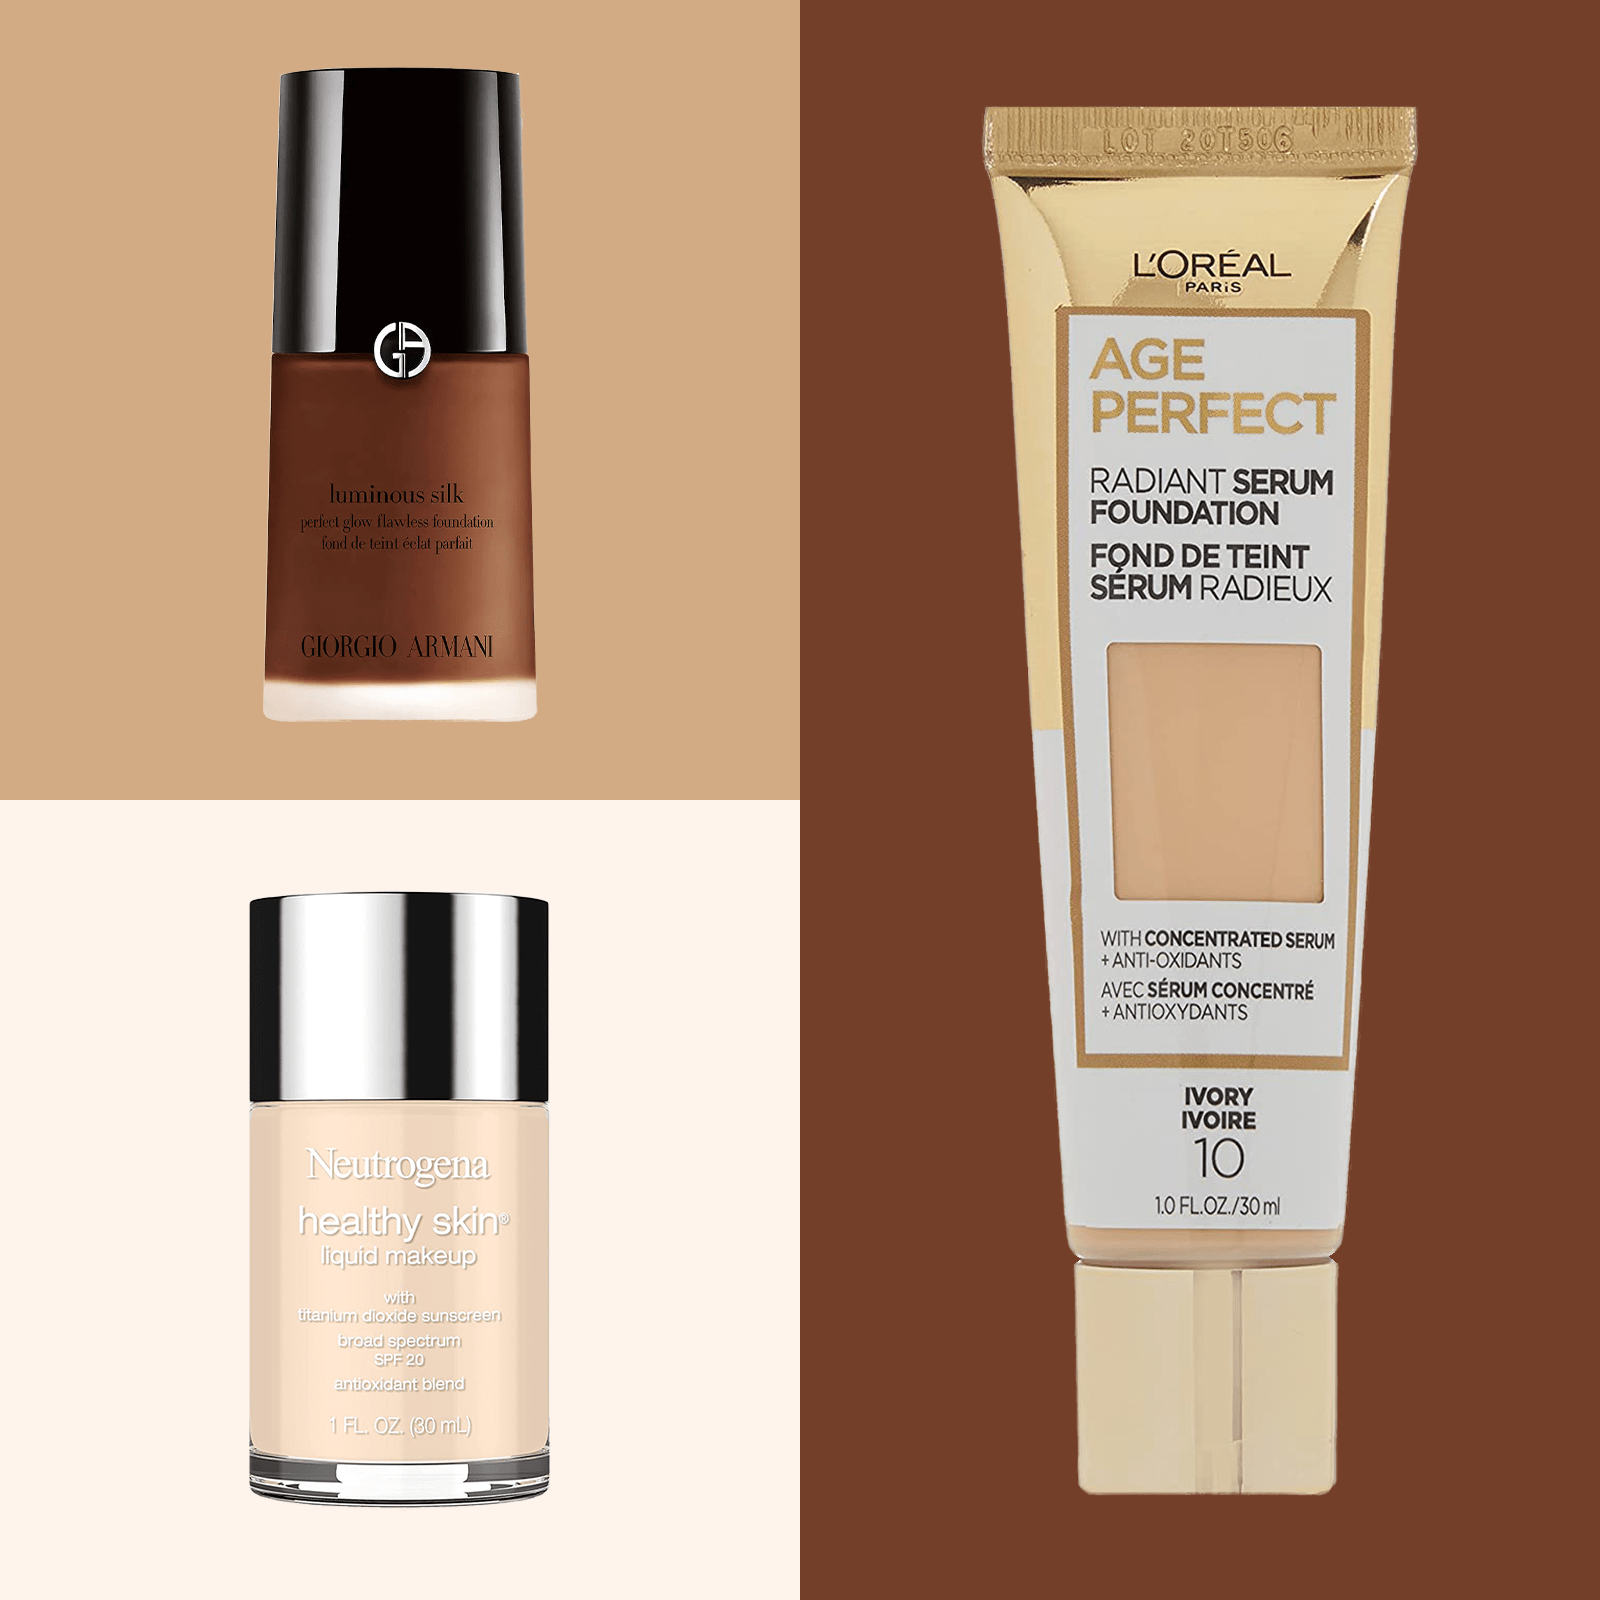 The Foundation for Skin To Turn Back the Clock